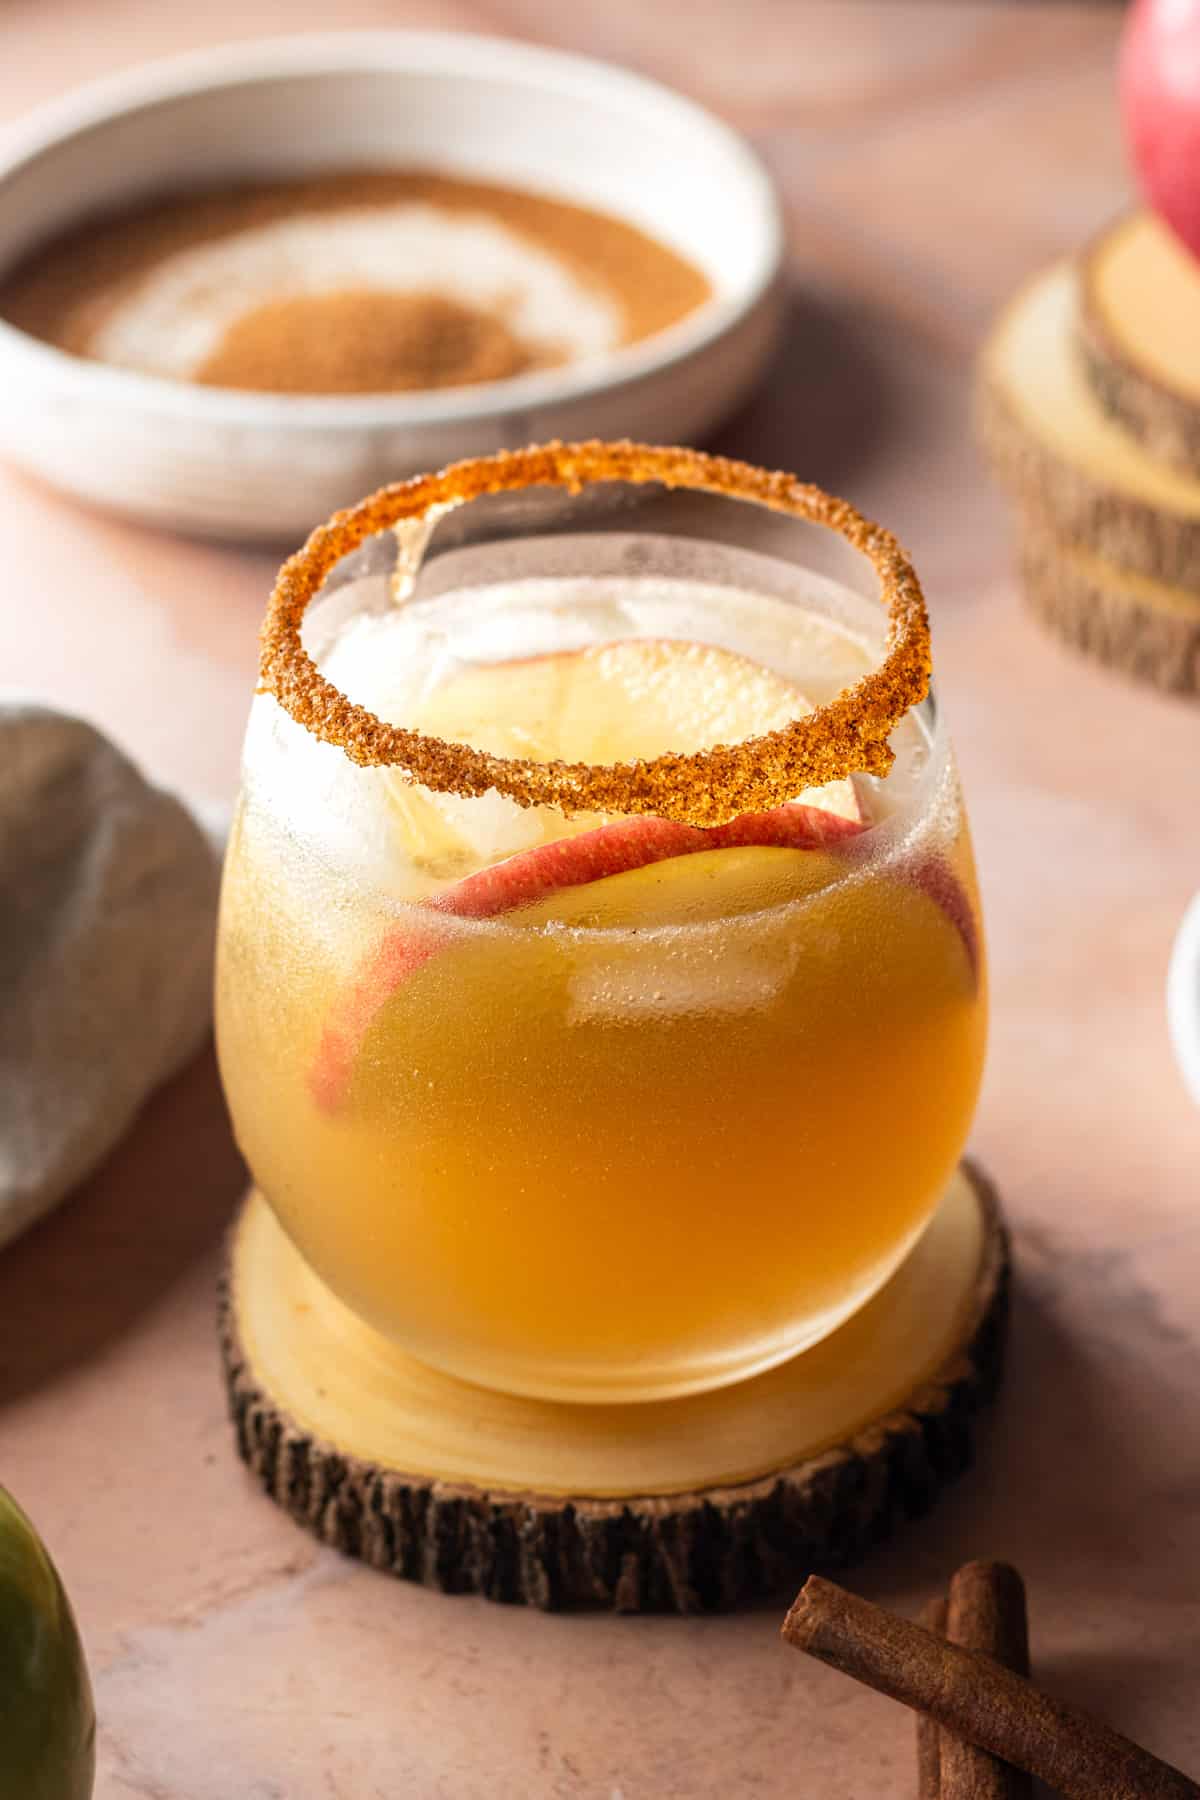 A fall margarita on a wooden coaster in a wine glass garnished with cinnamon sugar and apple slices with a bowl of cinnamon sugar in the background.